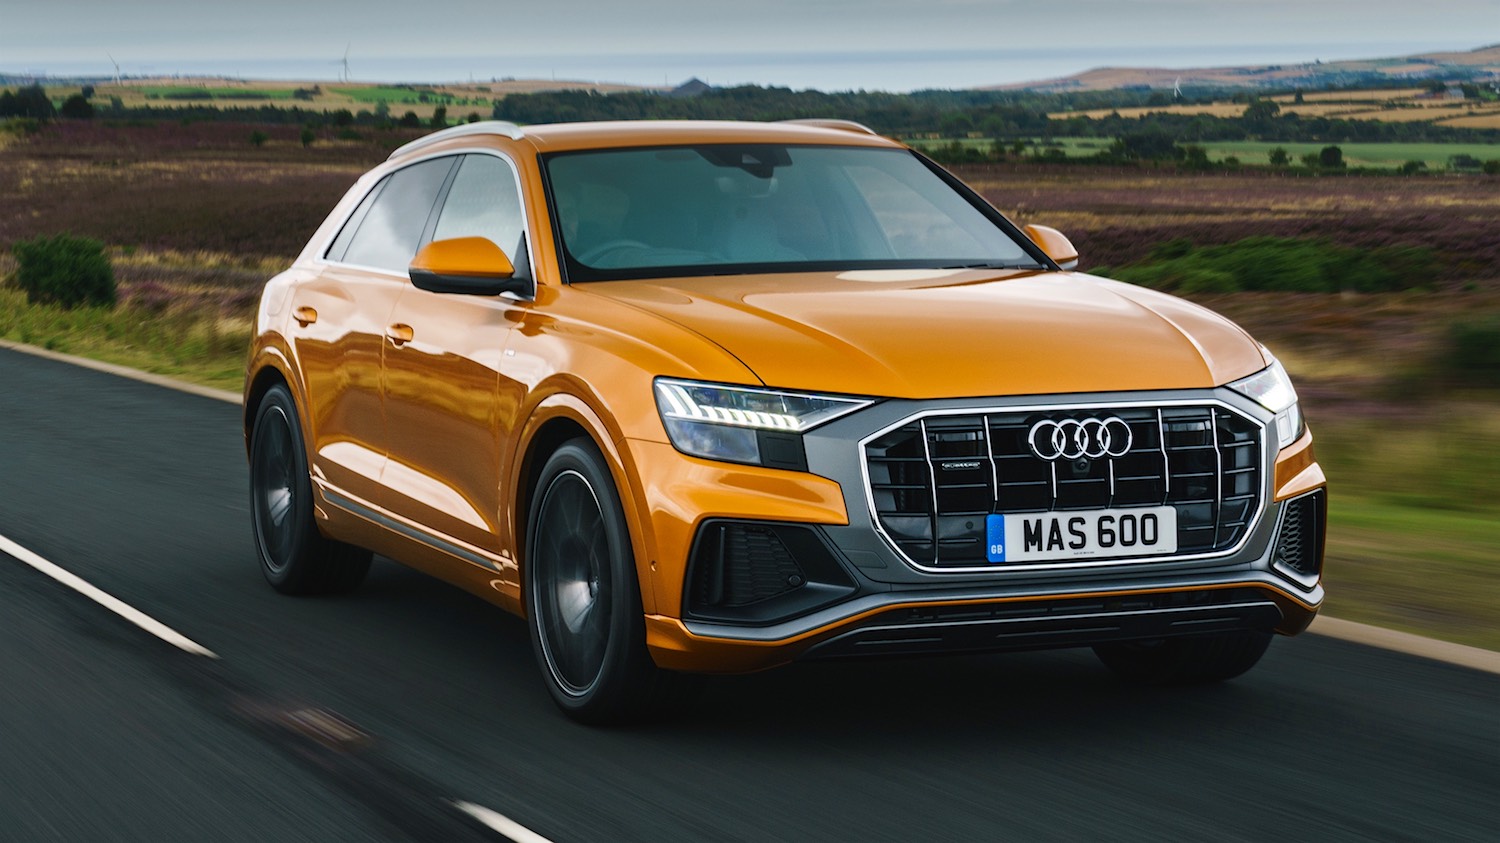 Maggie Barry reviews the All-New Audi Q8 Vorsprung edition for drive 20